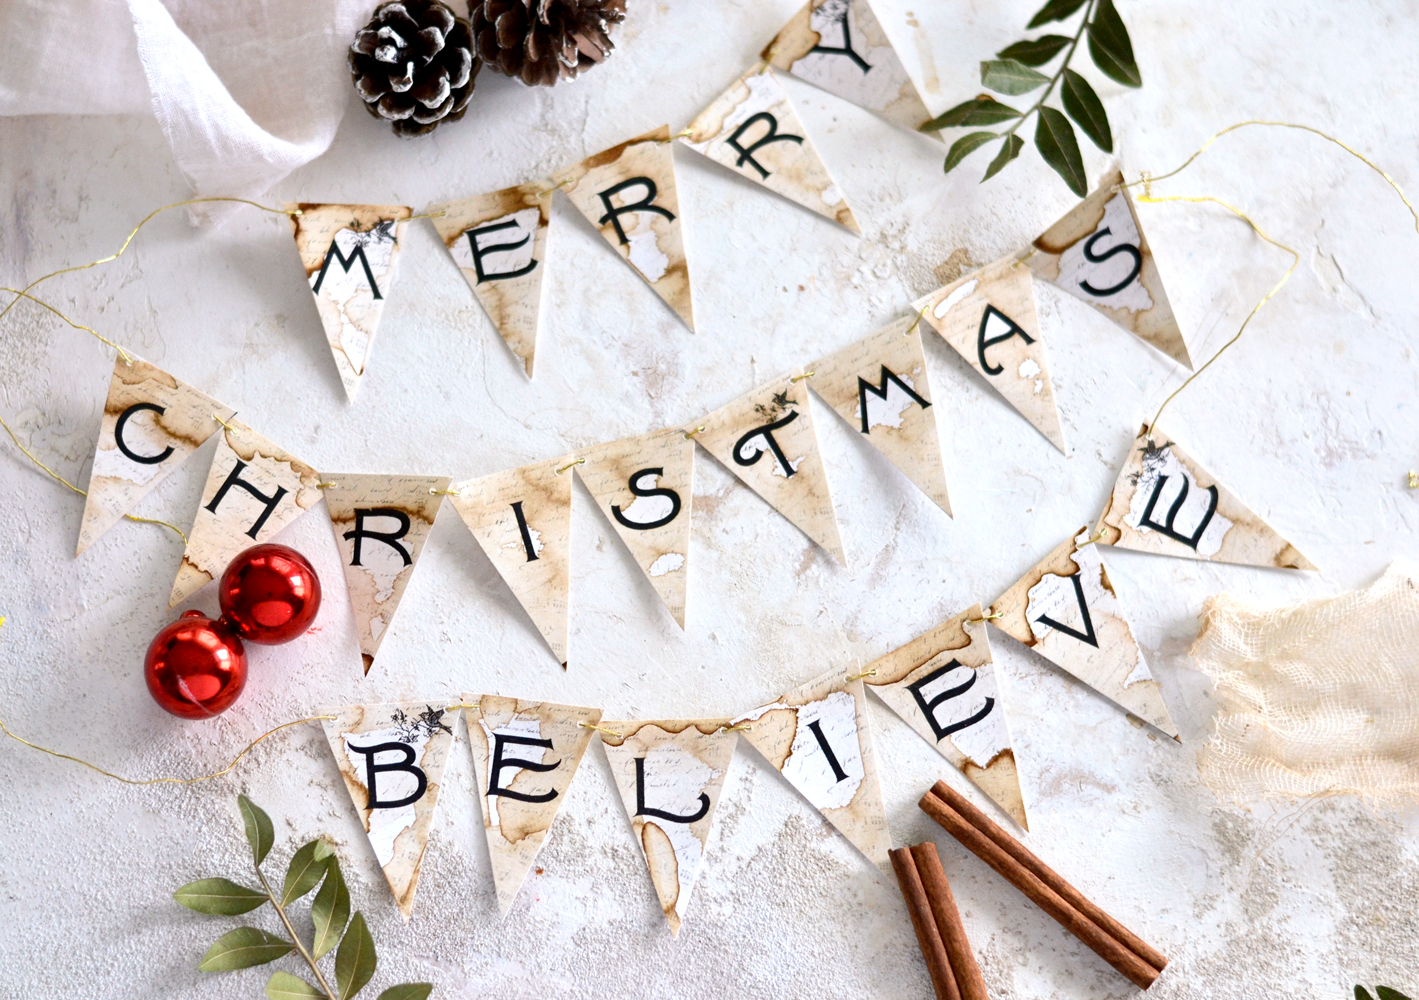 The final Merry Christmas and Believe Christmas banners